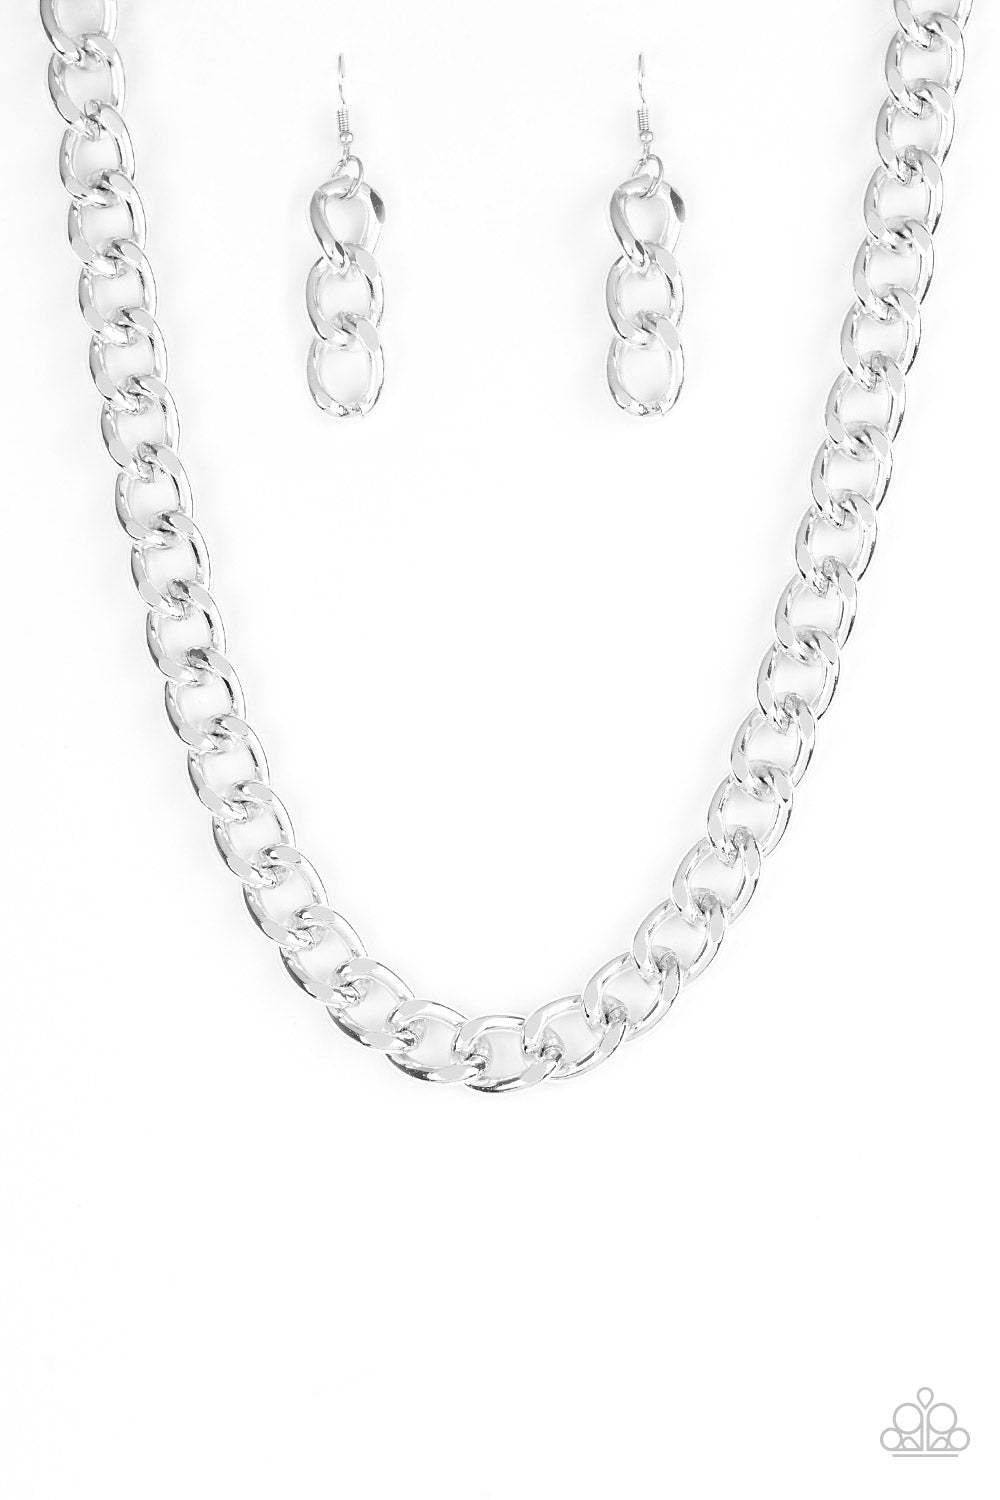 &lt;P&gt;Brushed in a high-sheen shimmer, a bold silver chain drapes below the collar in an edgy industrial fashion. Features an adjustable clasp closure.&lt;/p&gt;

&lt;P&gt;&lt;i&gt; Sold as one individual necklace.  Includes one pair of matching earrings.
&lt;/i&gt;&lt;/p&gt;

&lt;img src=\&quot;https://d9b54x484lq62.cloudfront.net/paparazzi/shopping/images/517_tag150x115_1.png\&quot; alt=\&quot;New Kit\&quot; align=\&quot;middle\&quot; height=\&quot;50\&quot; width=\&quot;50\&quot;/&gt;